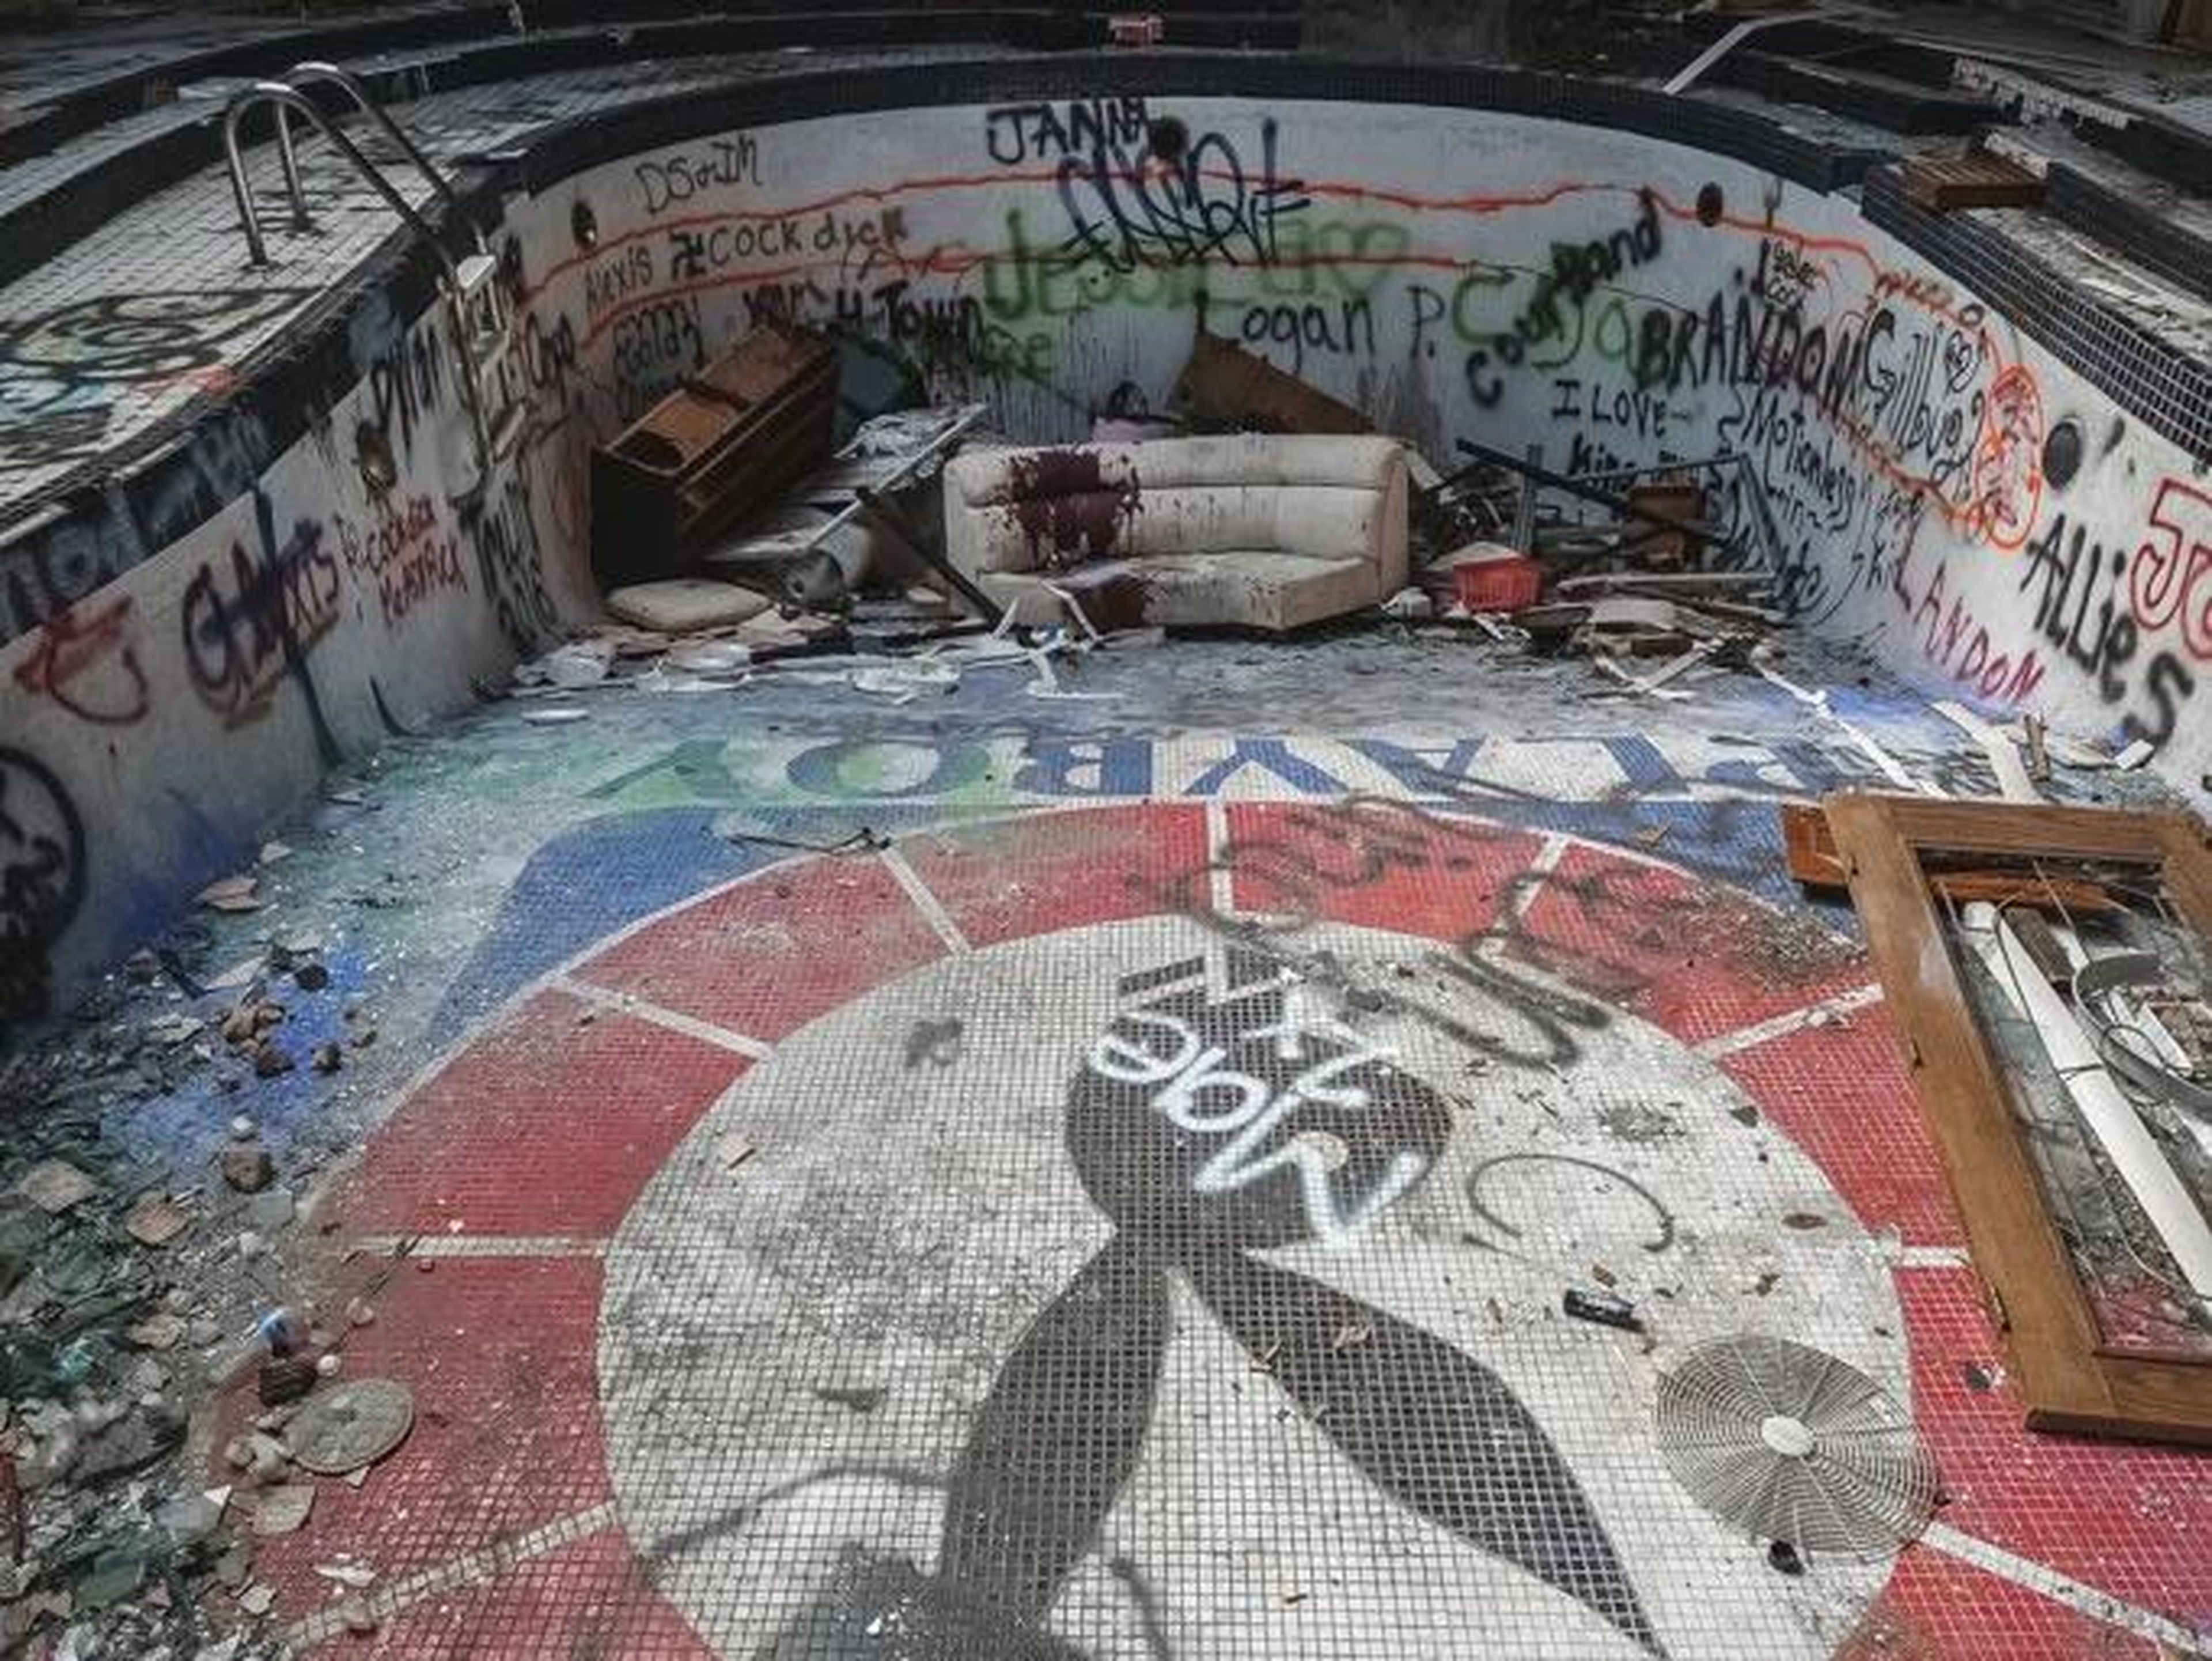 The owner got 20 years in prison, and the mansion, including an empty pool, is also now home to graffiti.